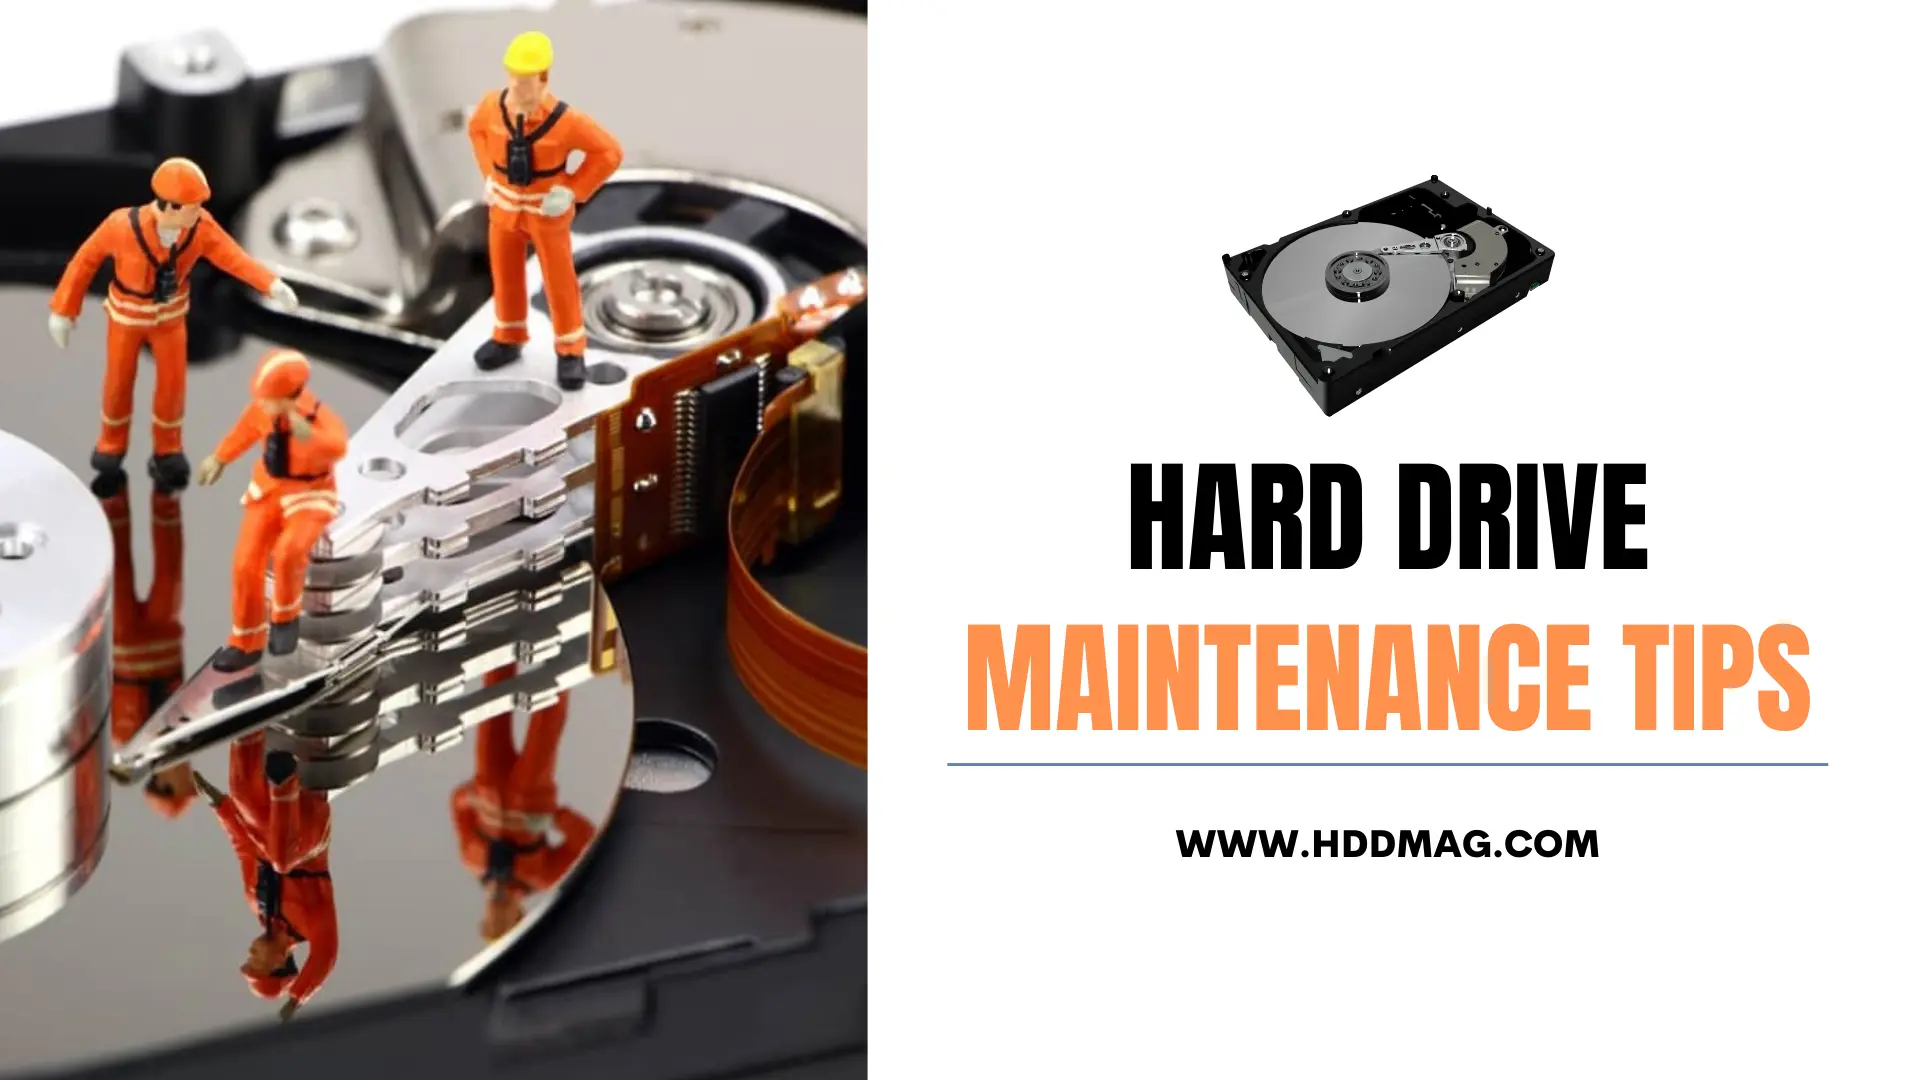 Hard Drive Maintenance Tips: How to & Easy Steps!